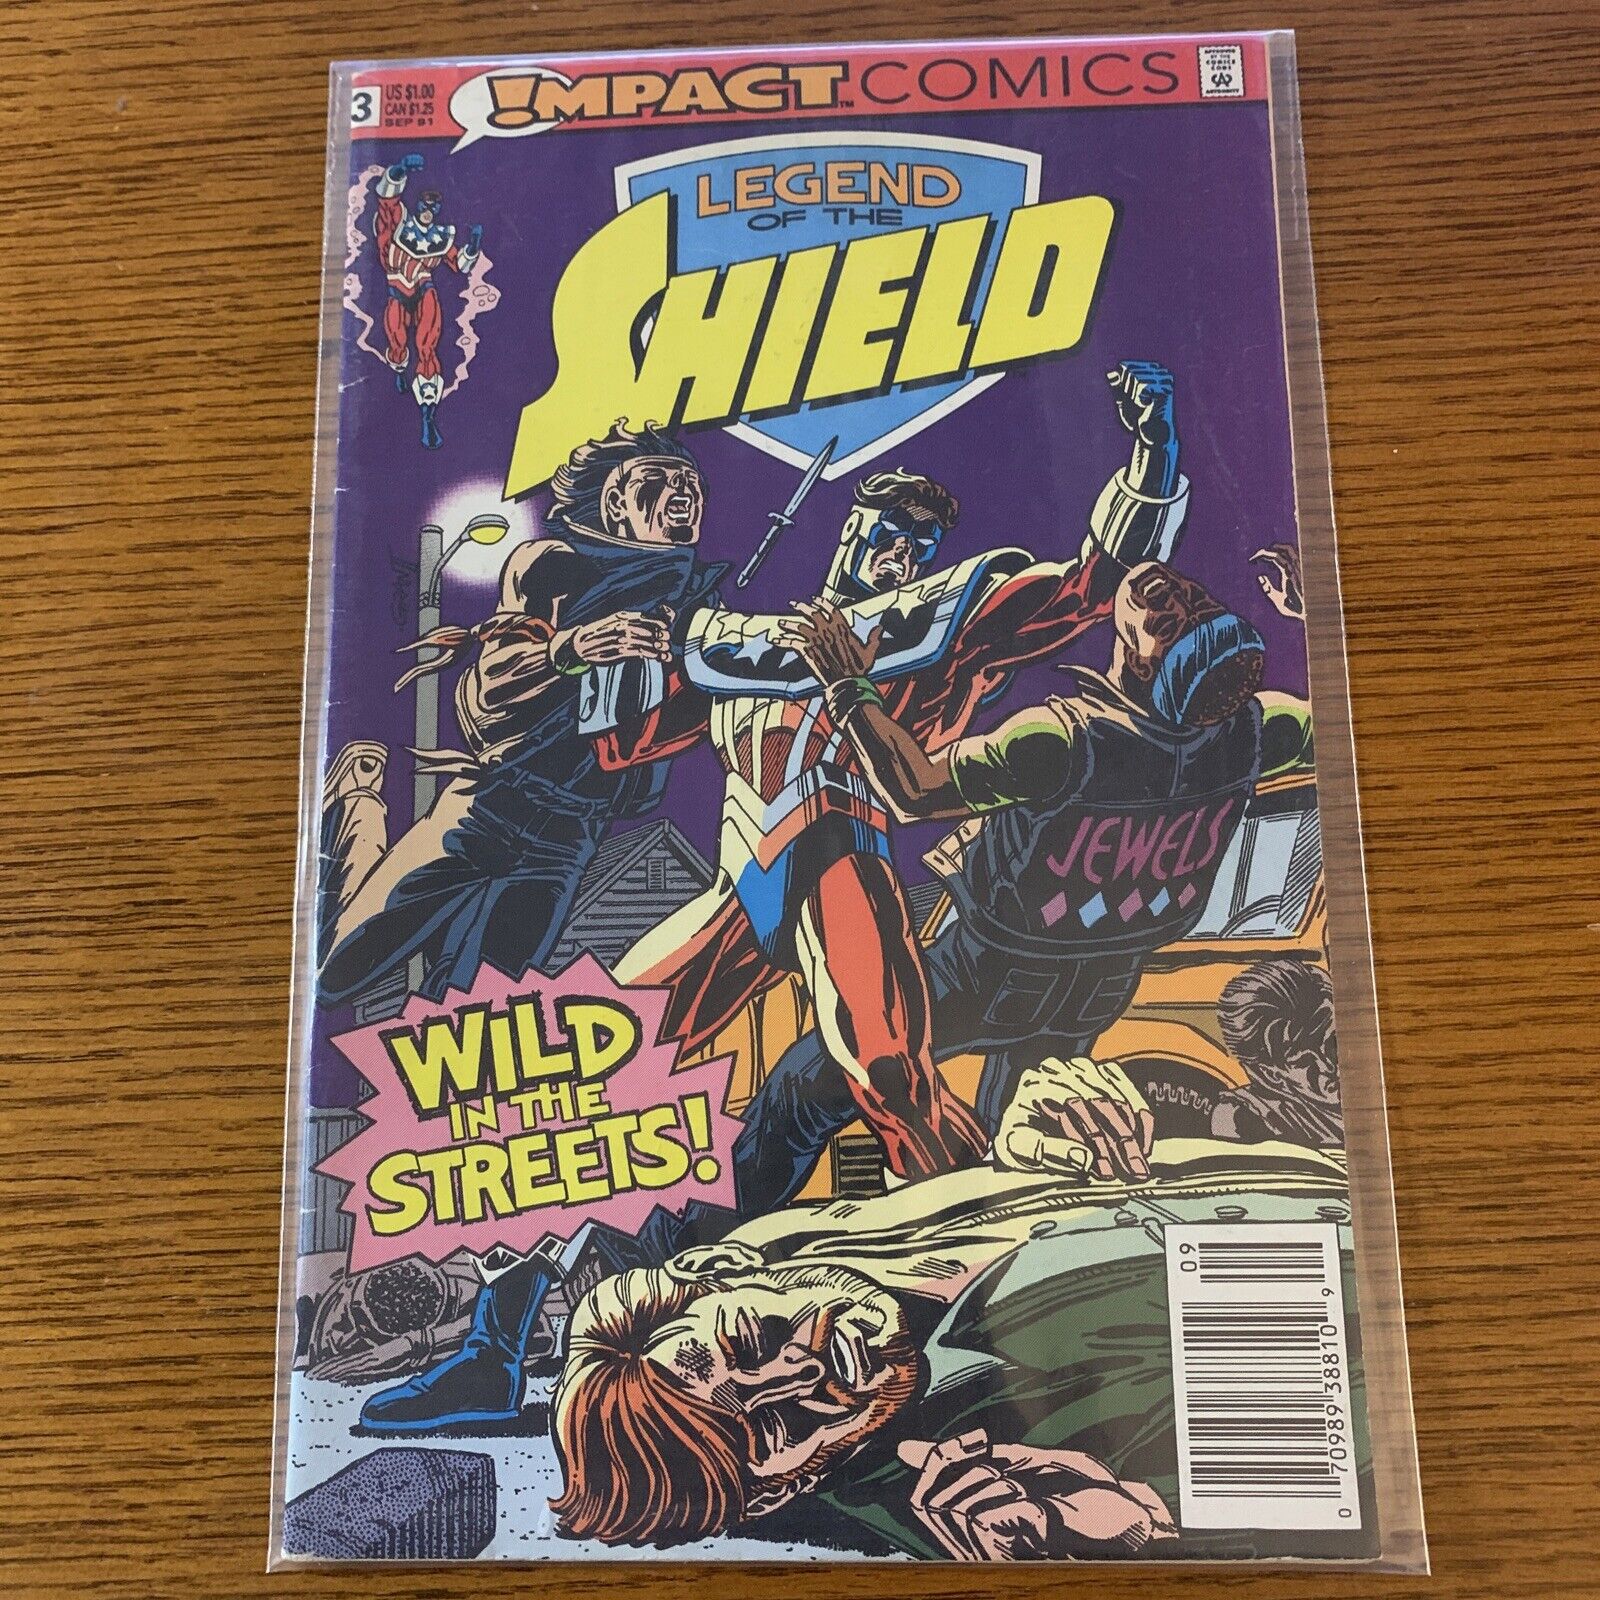 Impact Comics Legend of the Shield #3 "Wild in the Streets" Comic Book